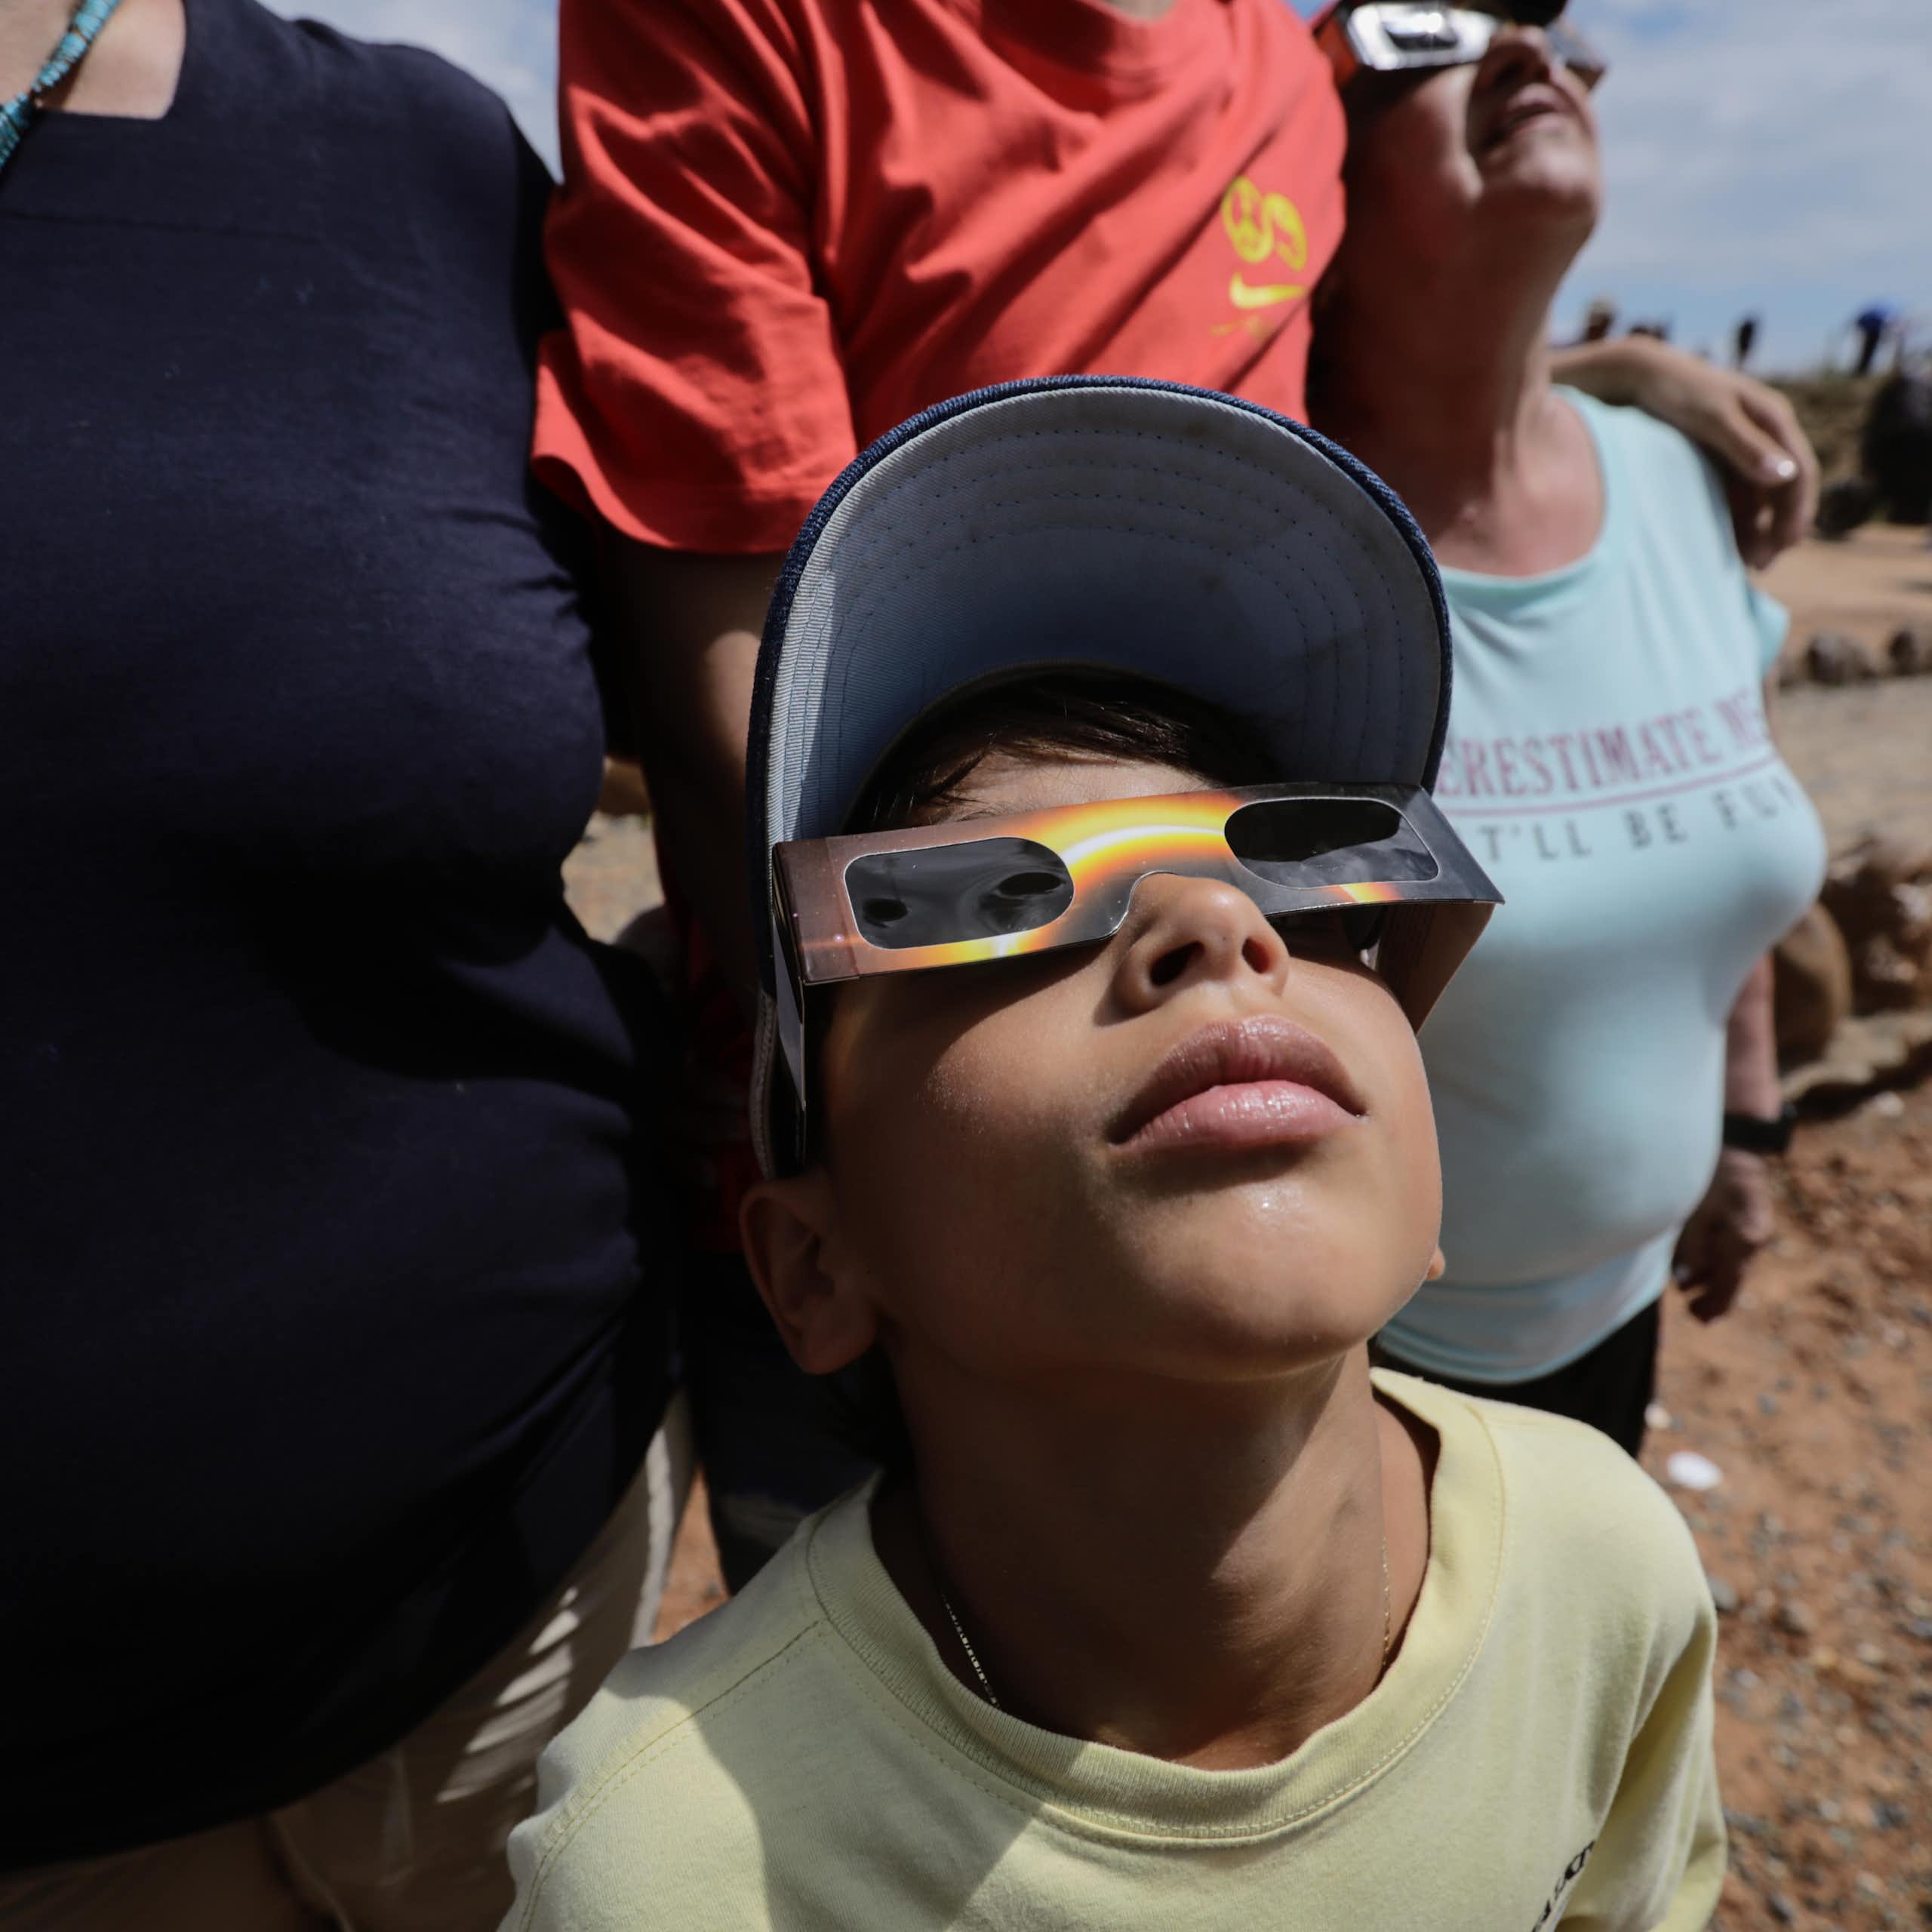 A young boy wearing protective glasses looks skyward.